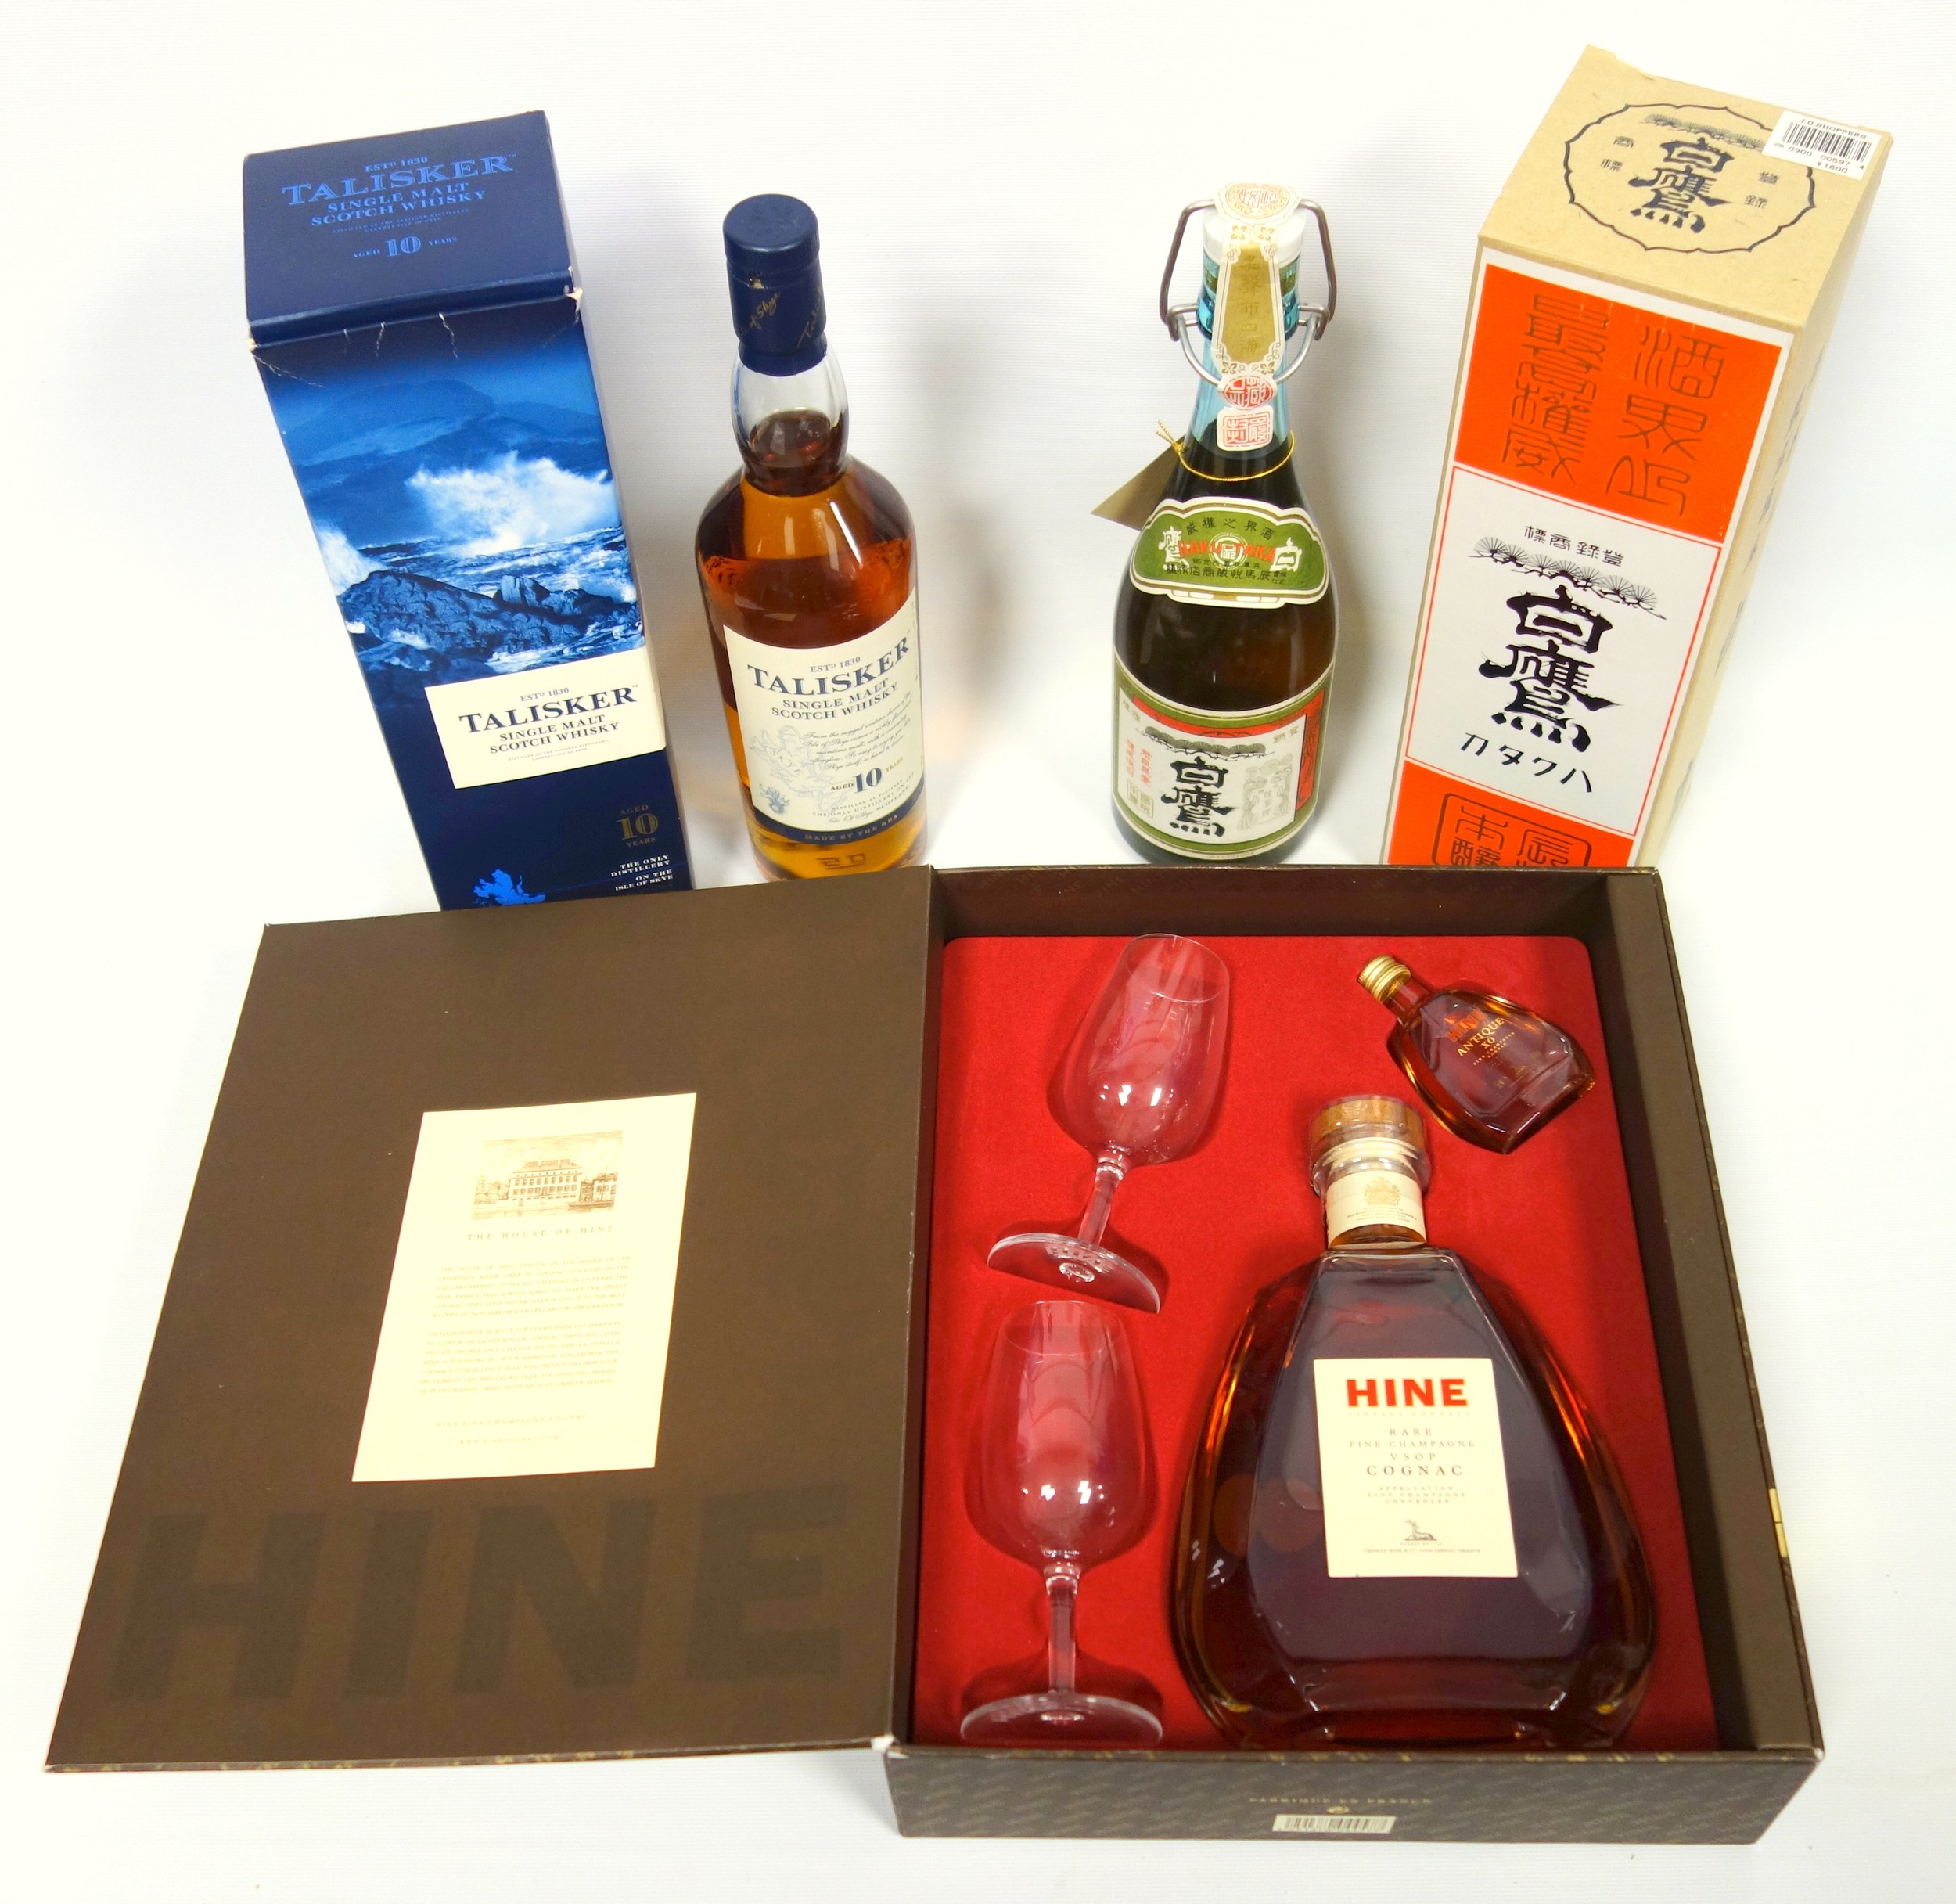 Bottle of Hine Rare Fine Champagne VSOP Cognac, 70cl, 40% vol., with 2 tasting glasses and an XO